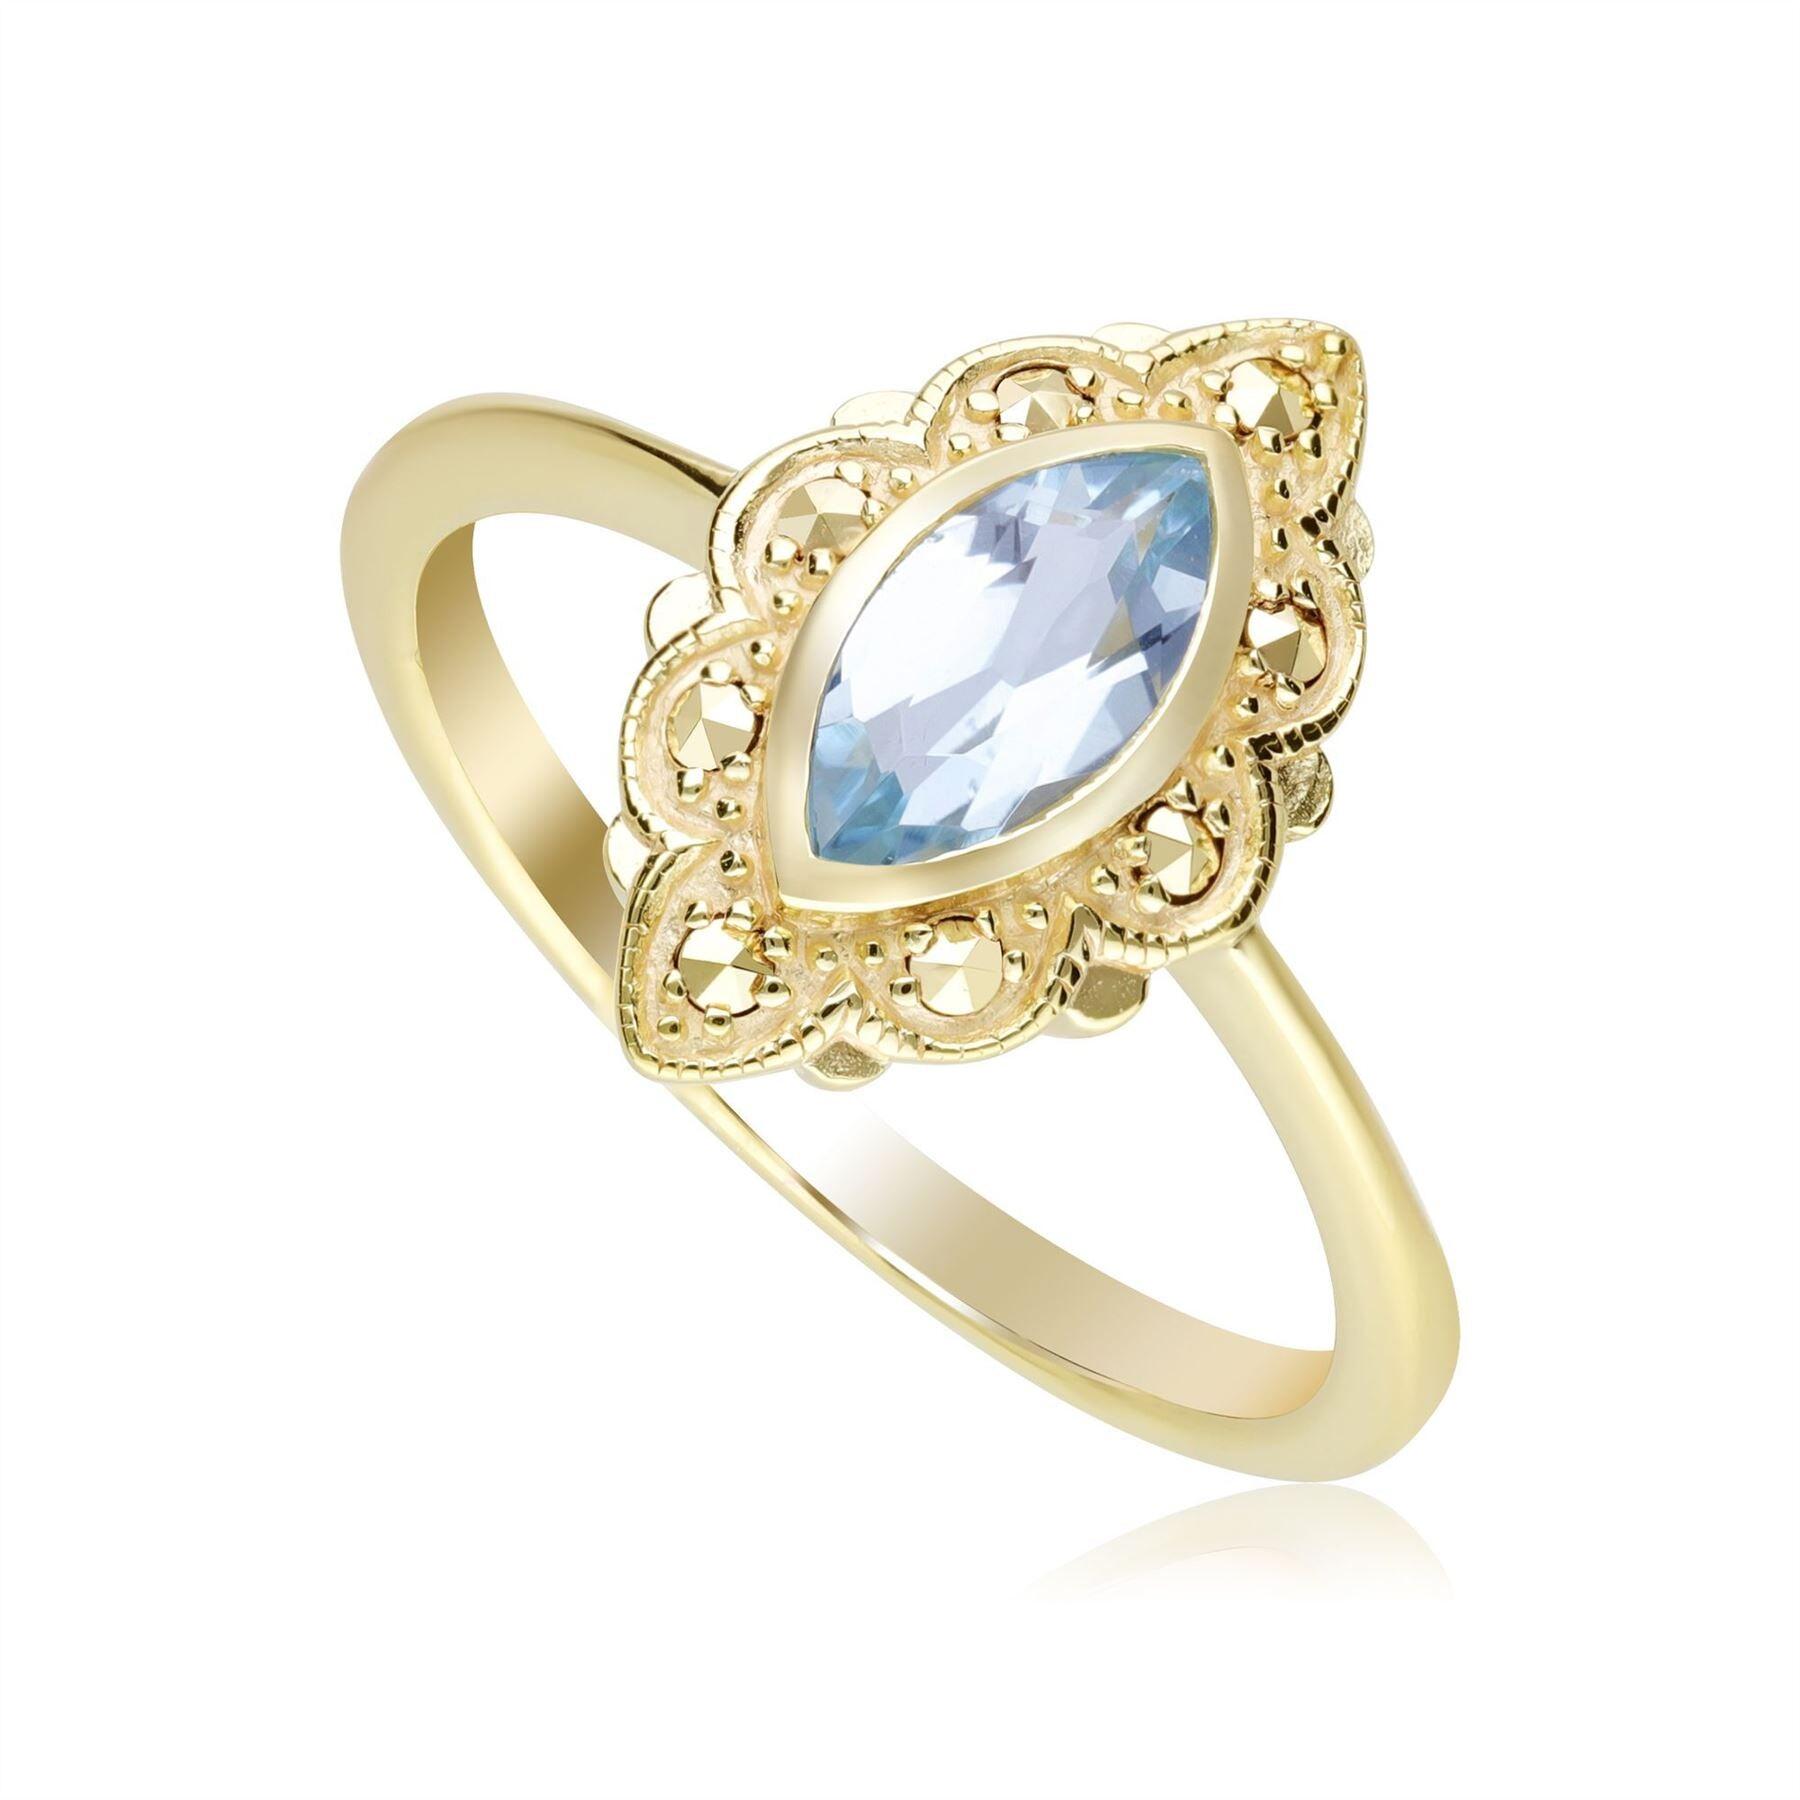 Art Nouveau Inspired Marquise Blue Topaz & Marcasite Ring in 18ct Gold Plated Silver